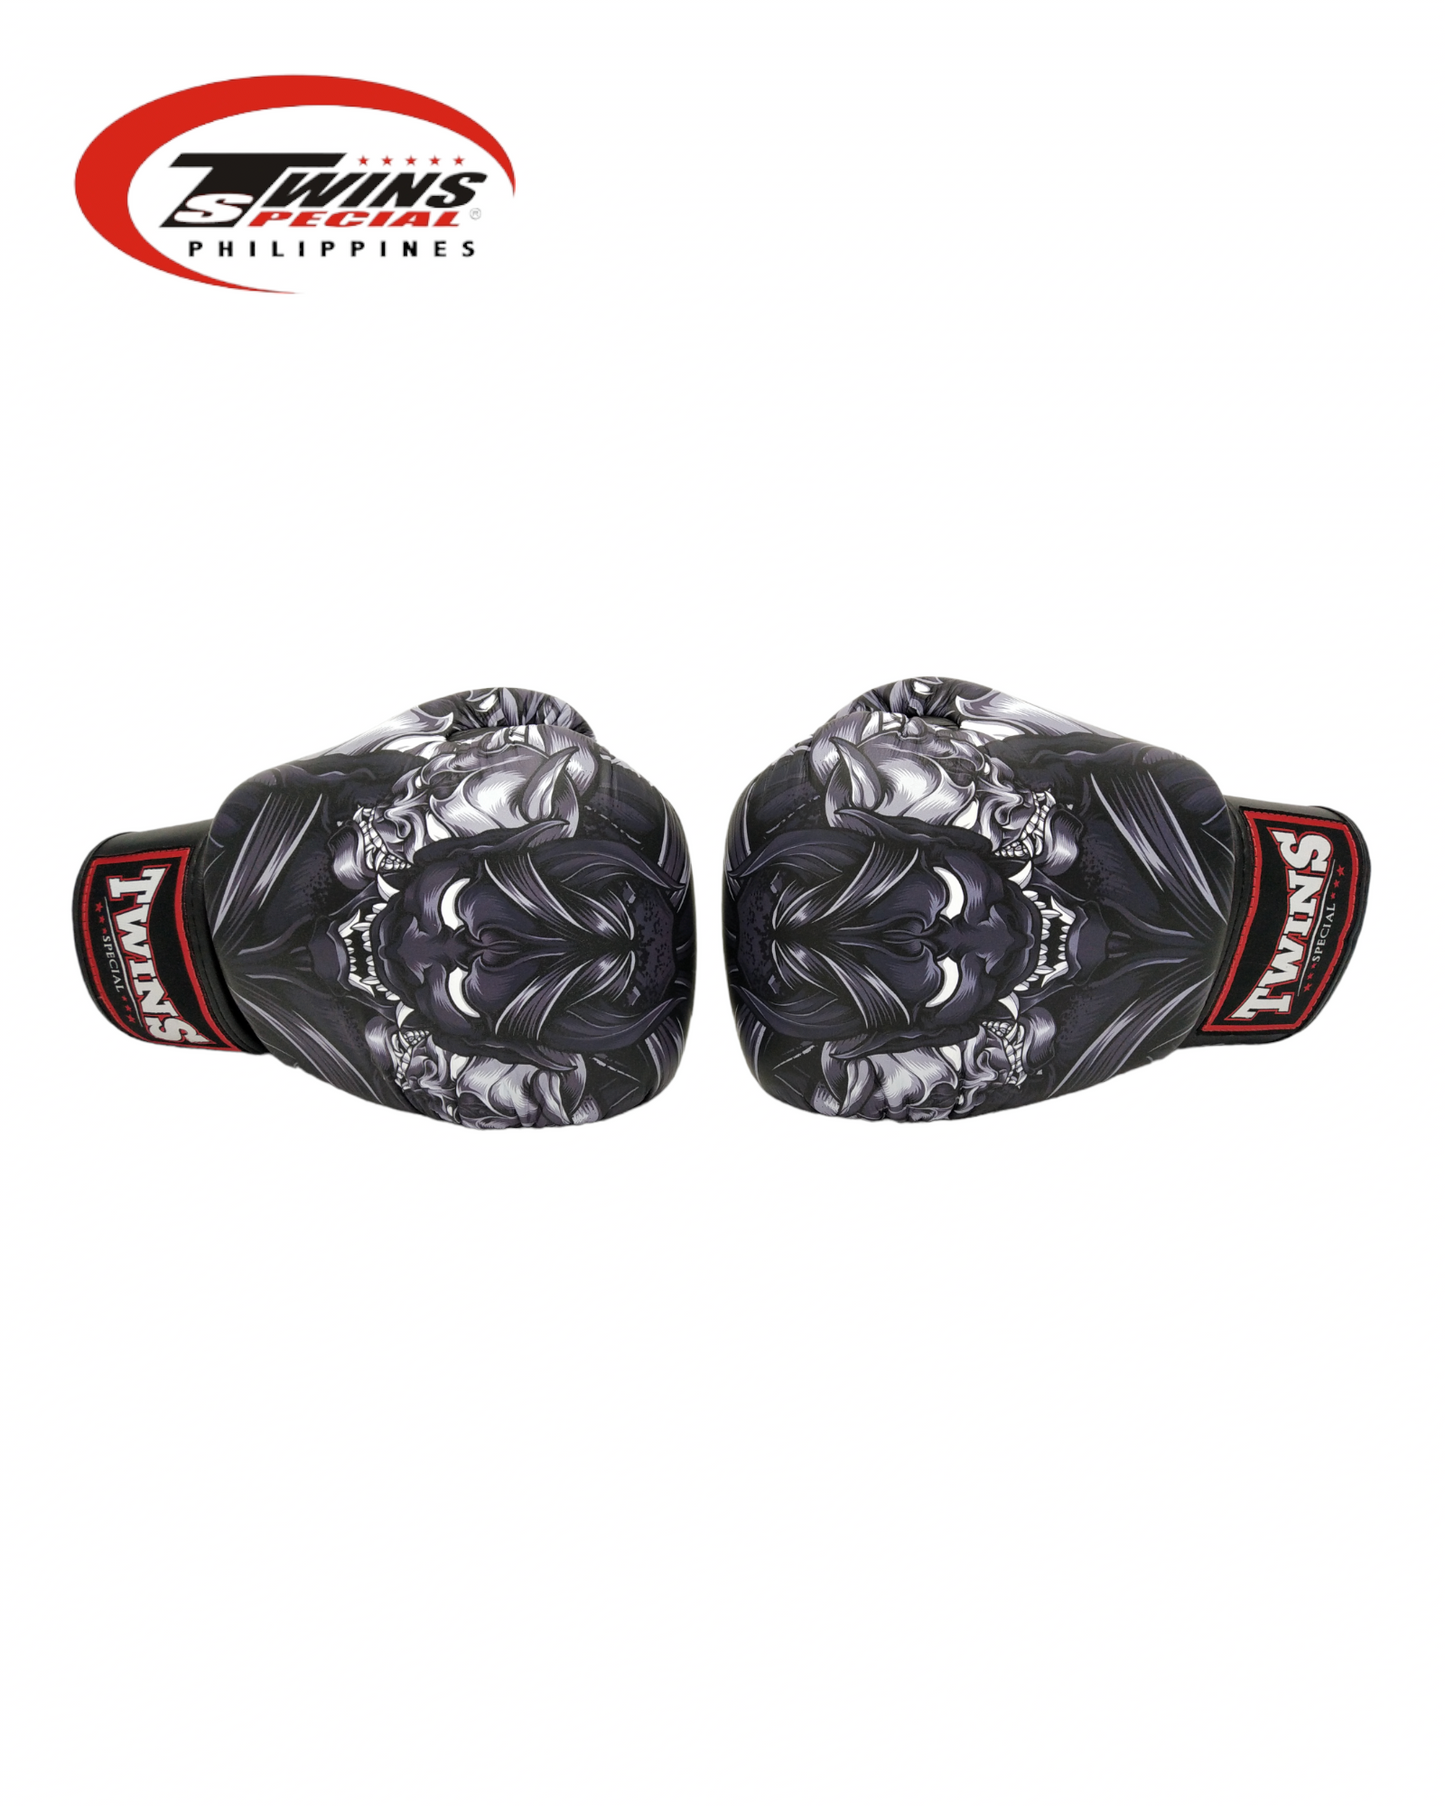 Twins Special Fancy Boxing Gloves Kabuki [Black]